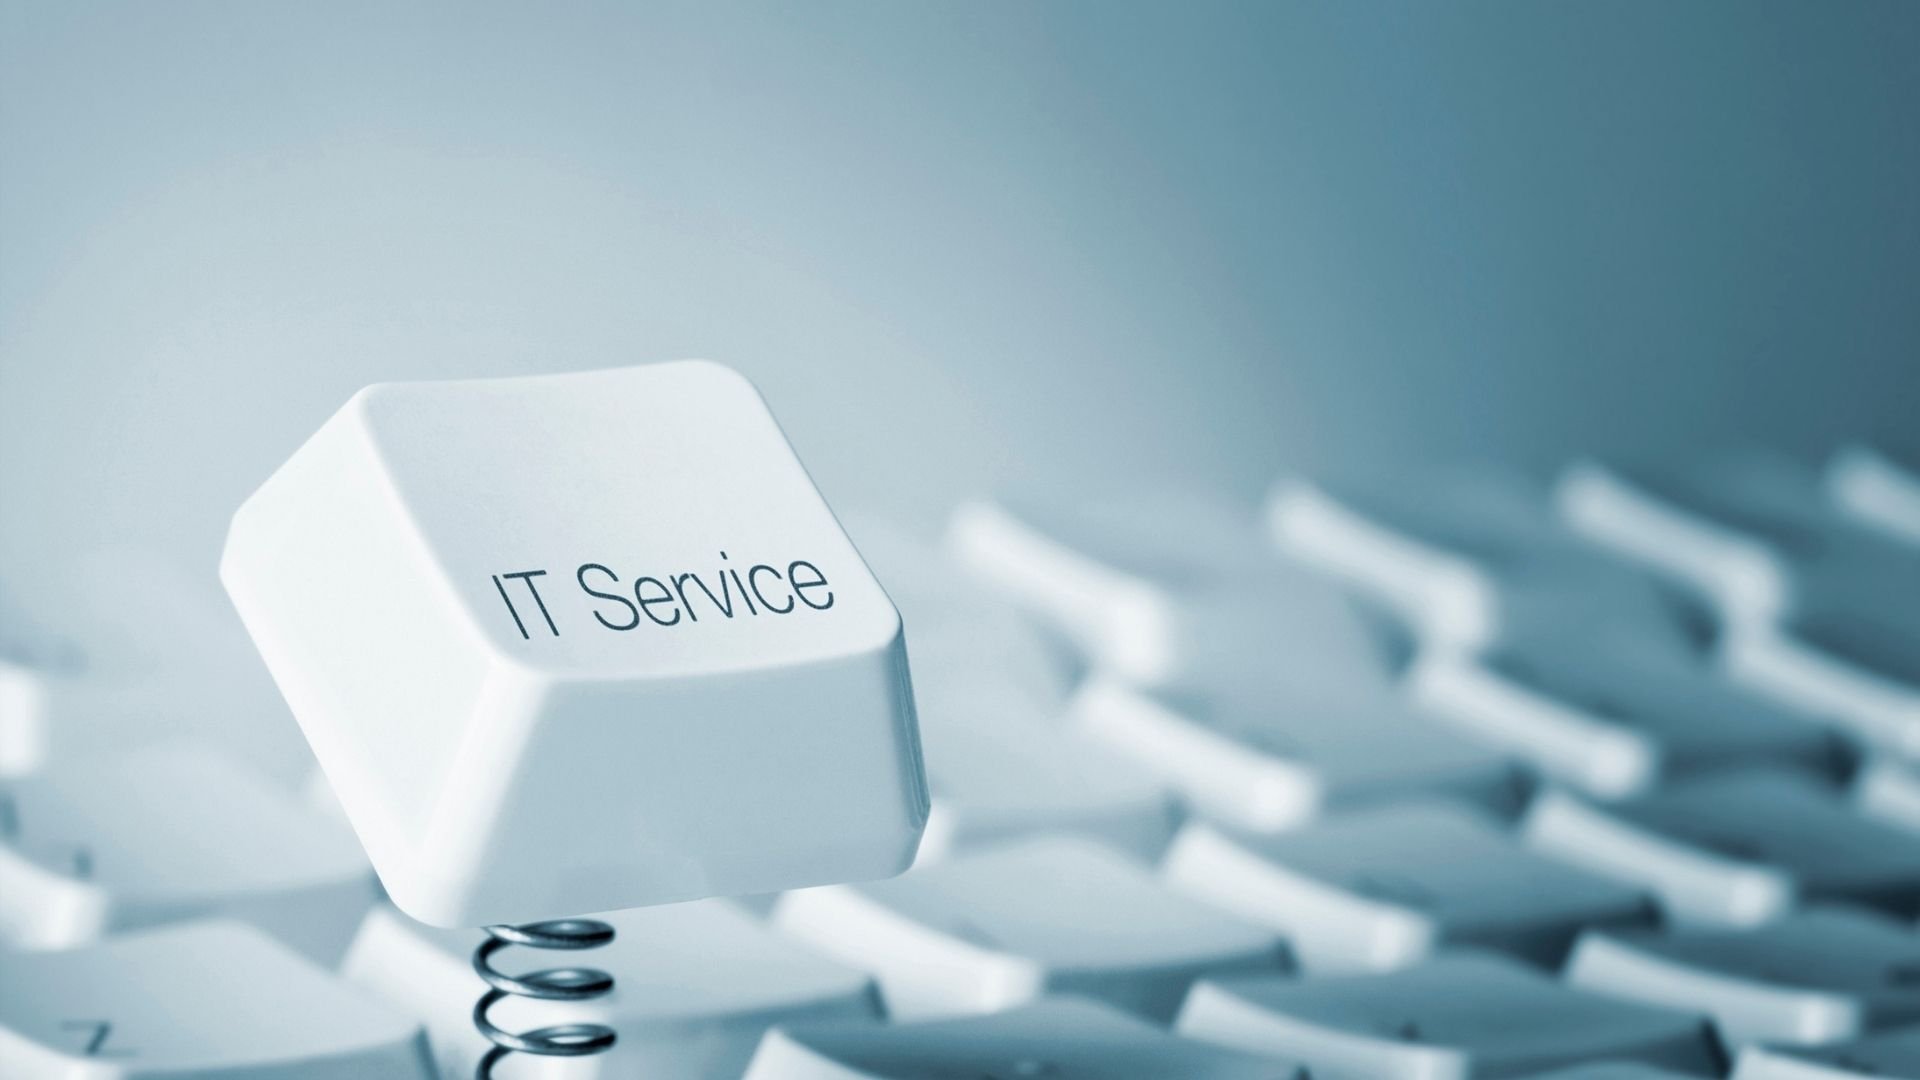 ITservices